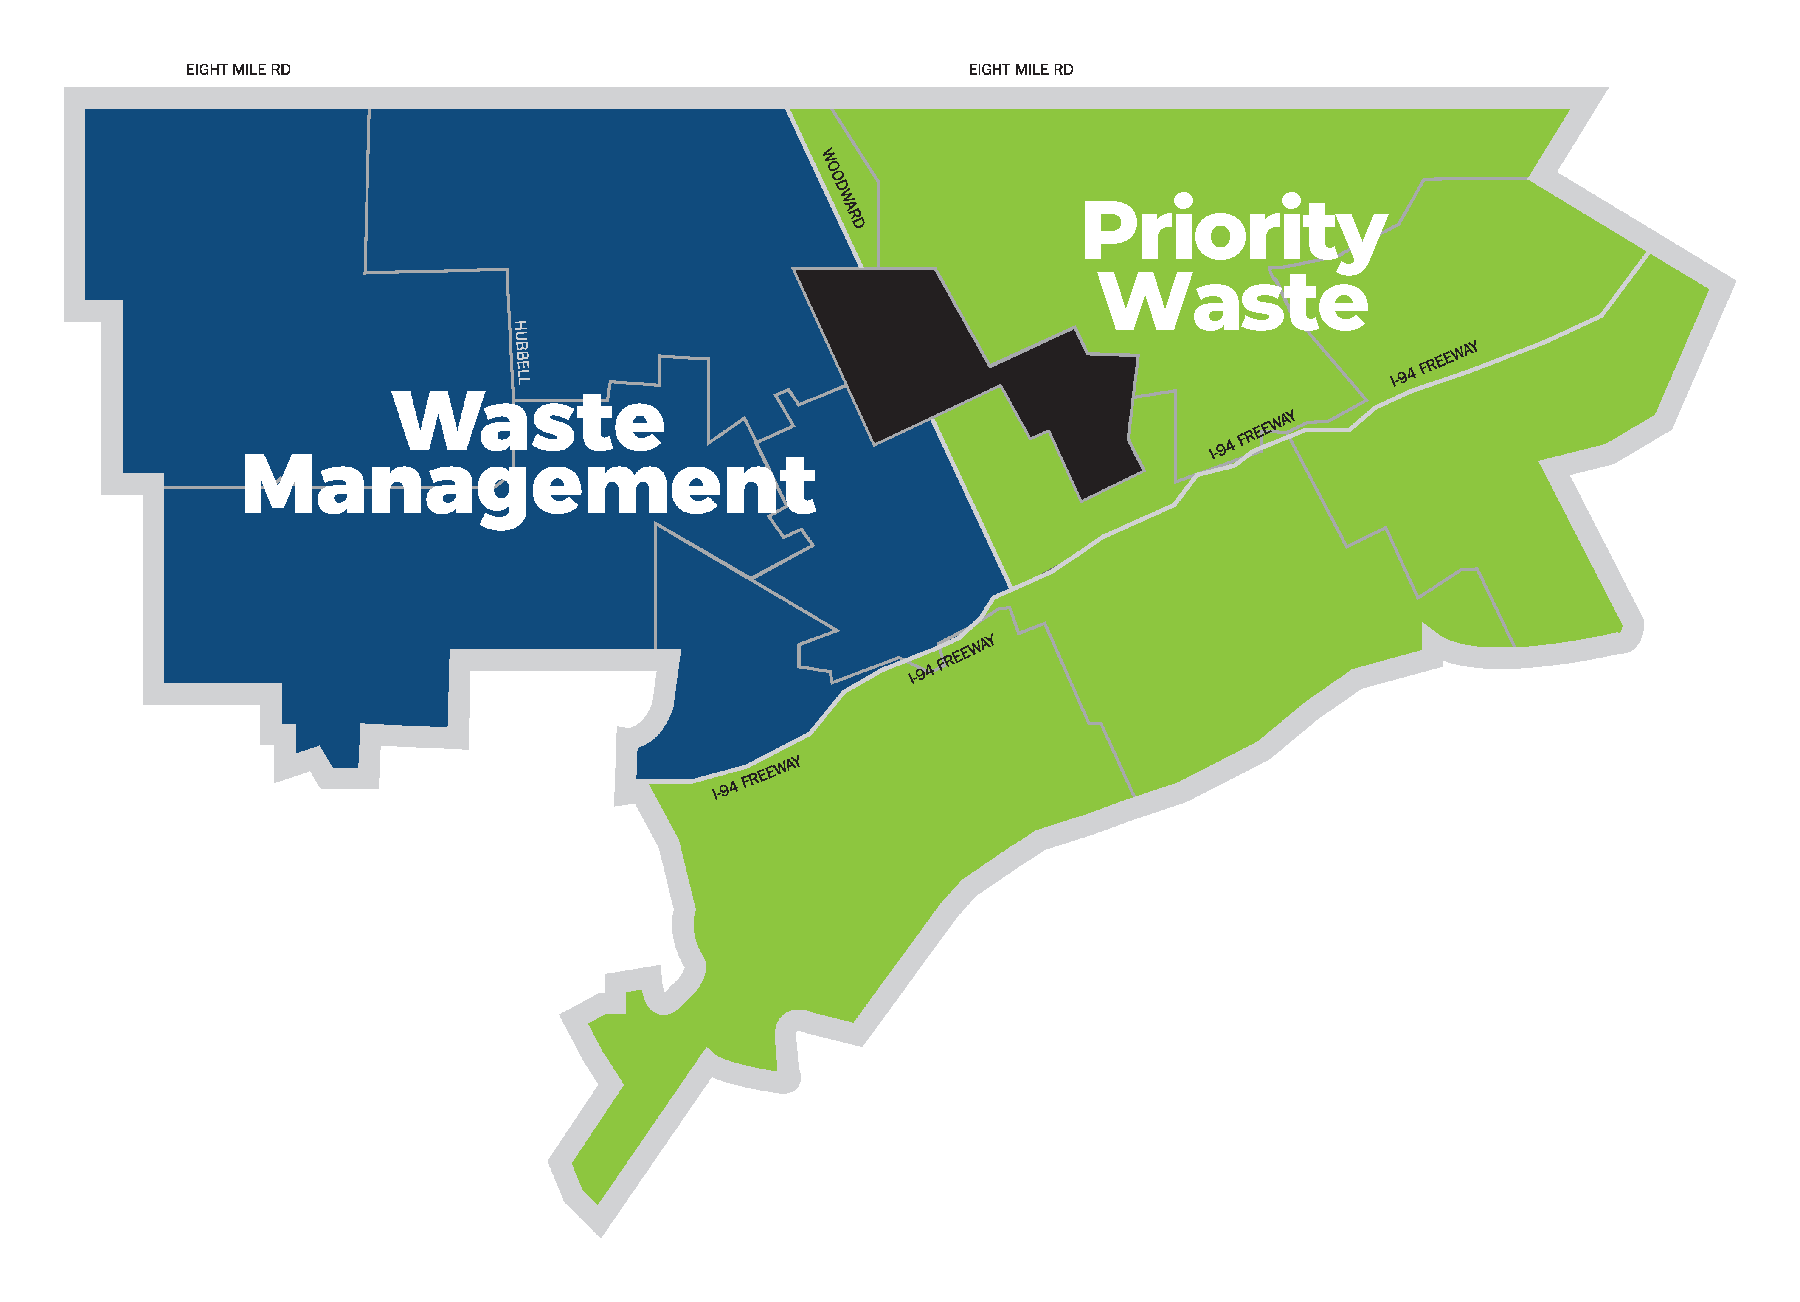 Waste Mgt. - Priority Waste Map